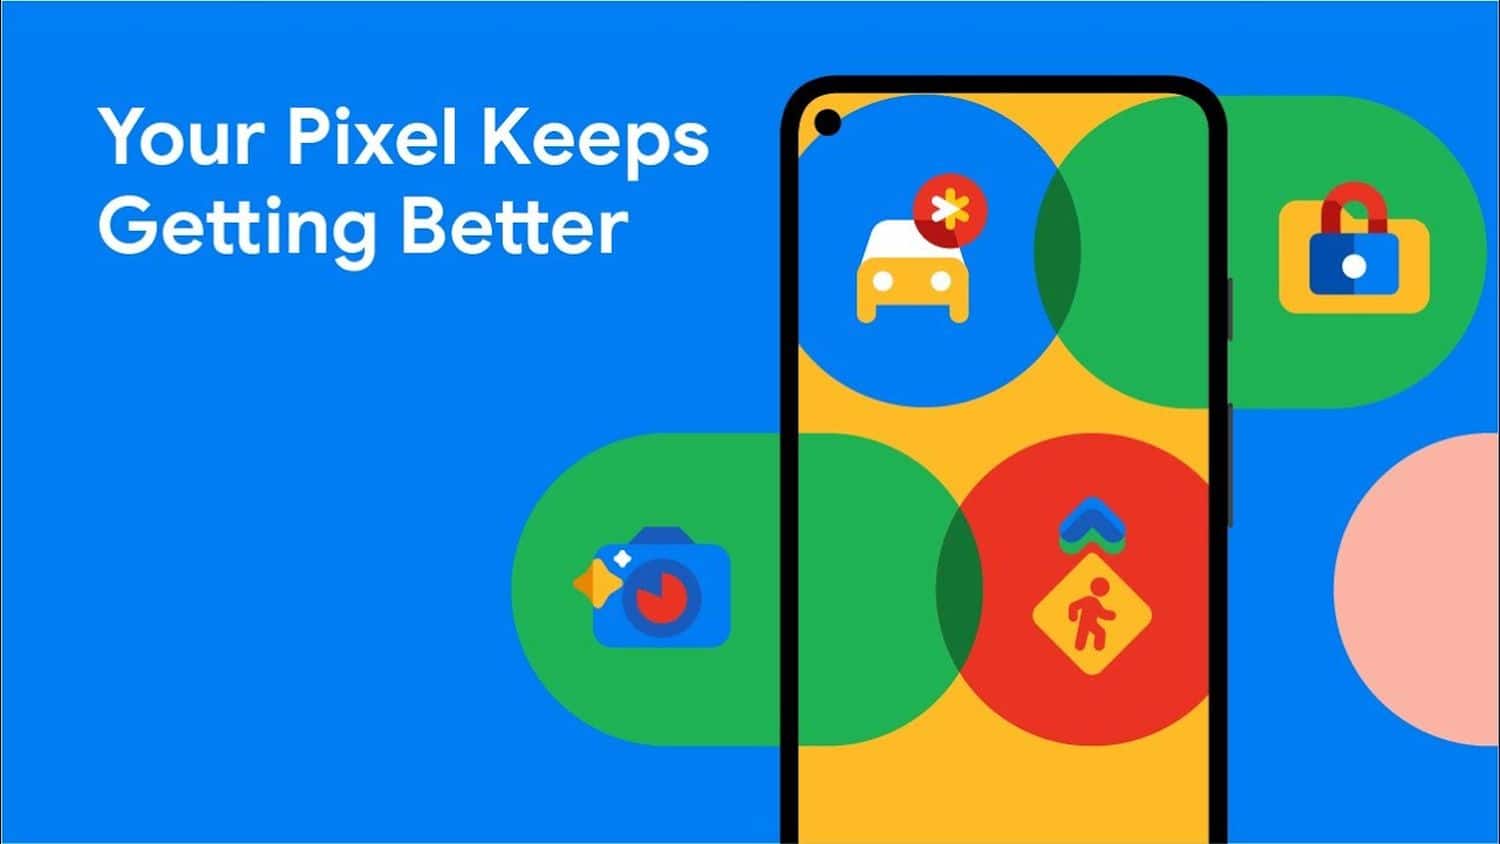 Pixel Feature Drop: The big update is around the corner – These new Pixel features are in the pipeline